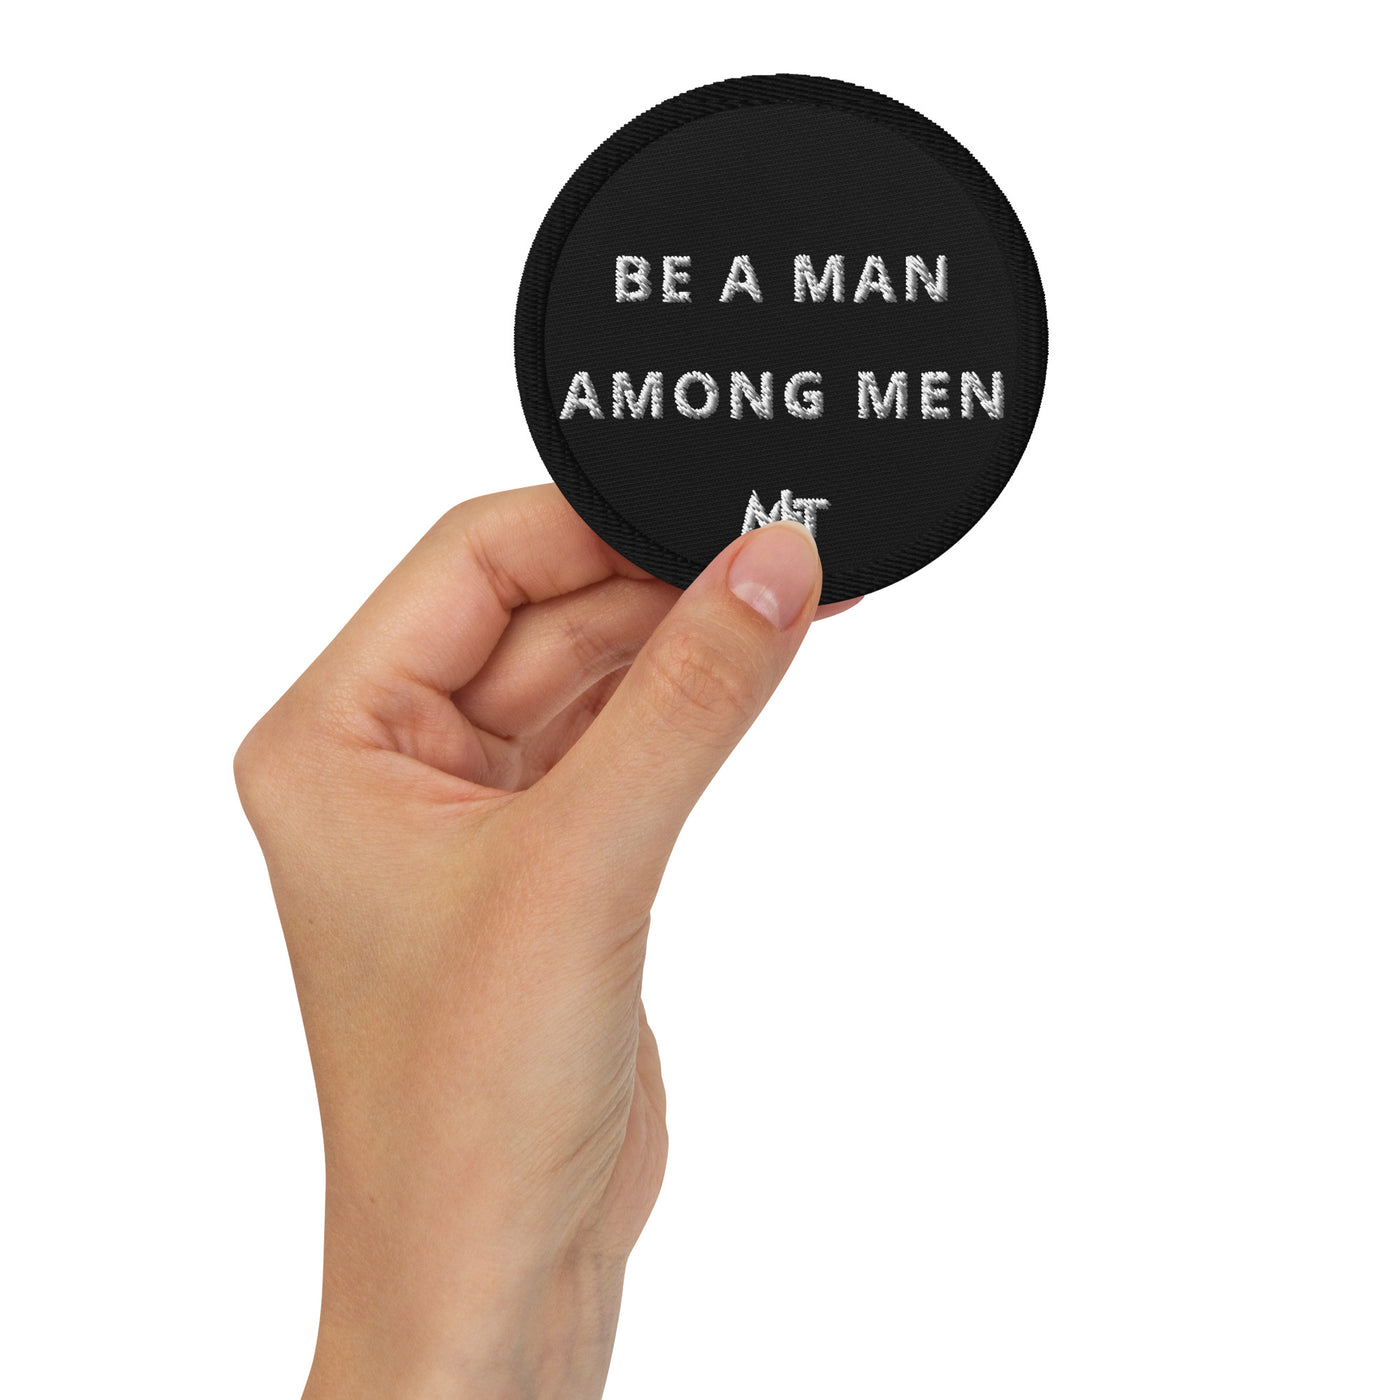 Be a man among men - Embroidered patches